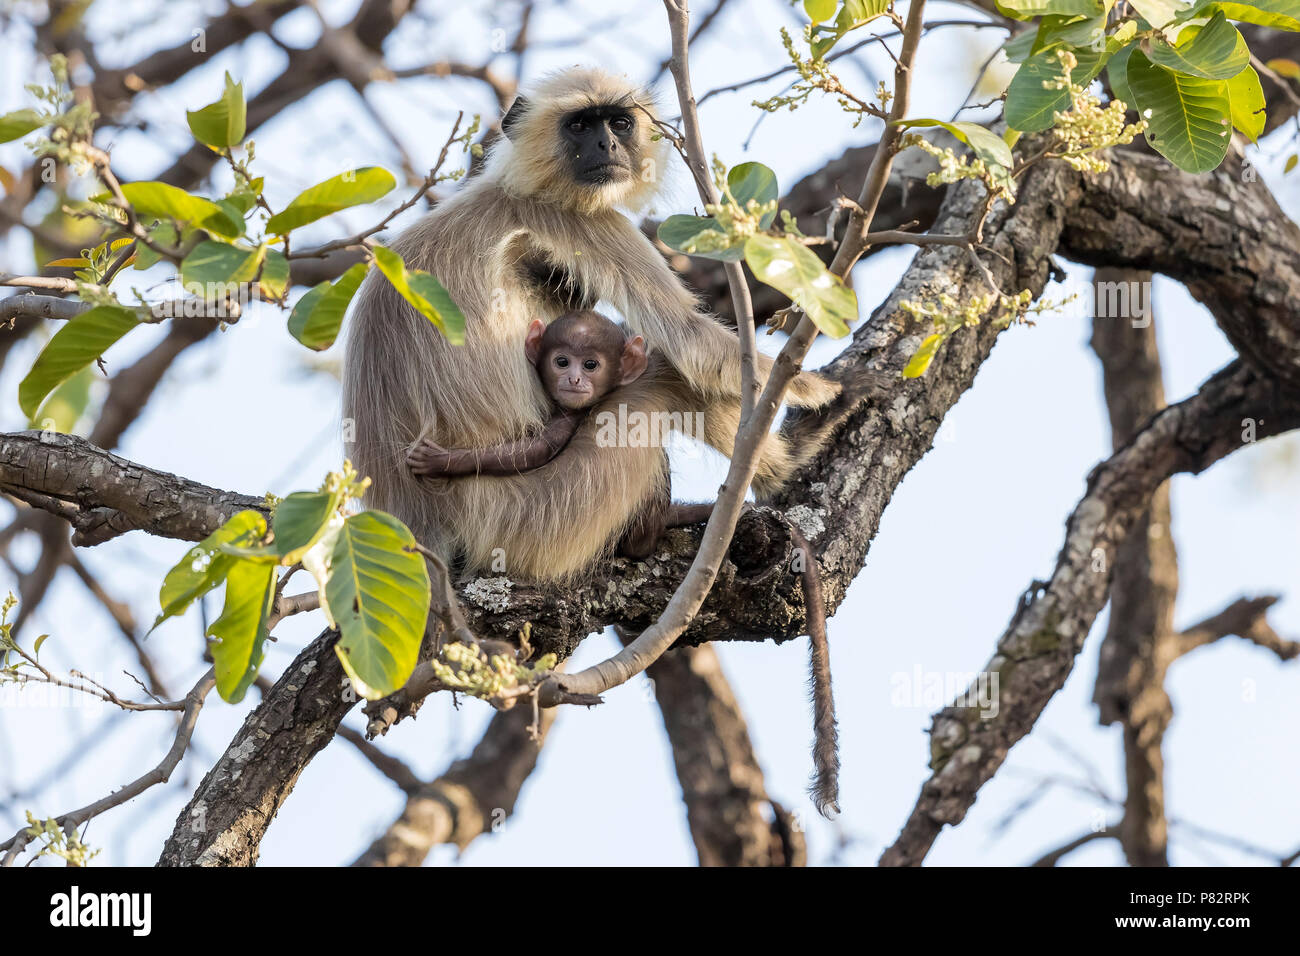 Adult & cub Northern Plains Langur sitting on a tree in Bandavgarh NP, India. March 2017. Stock Photo